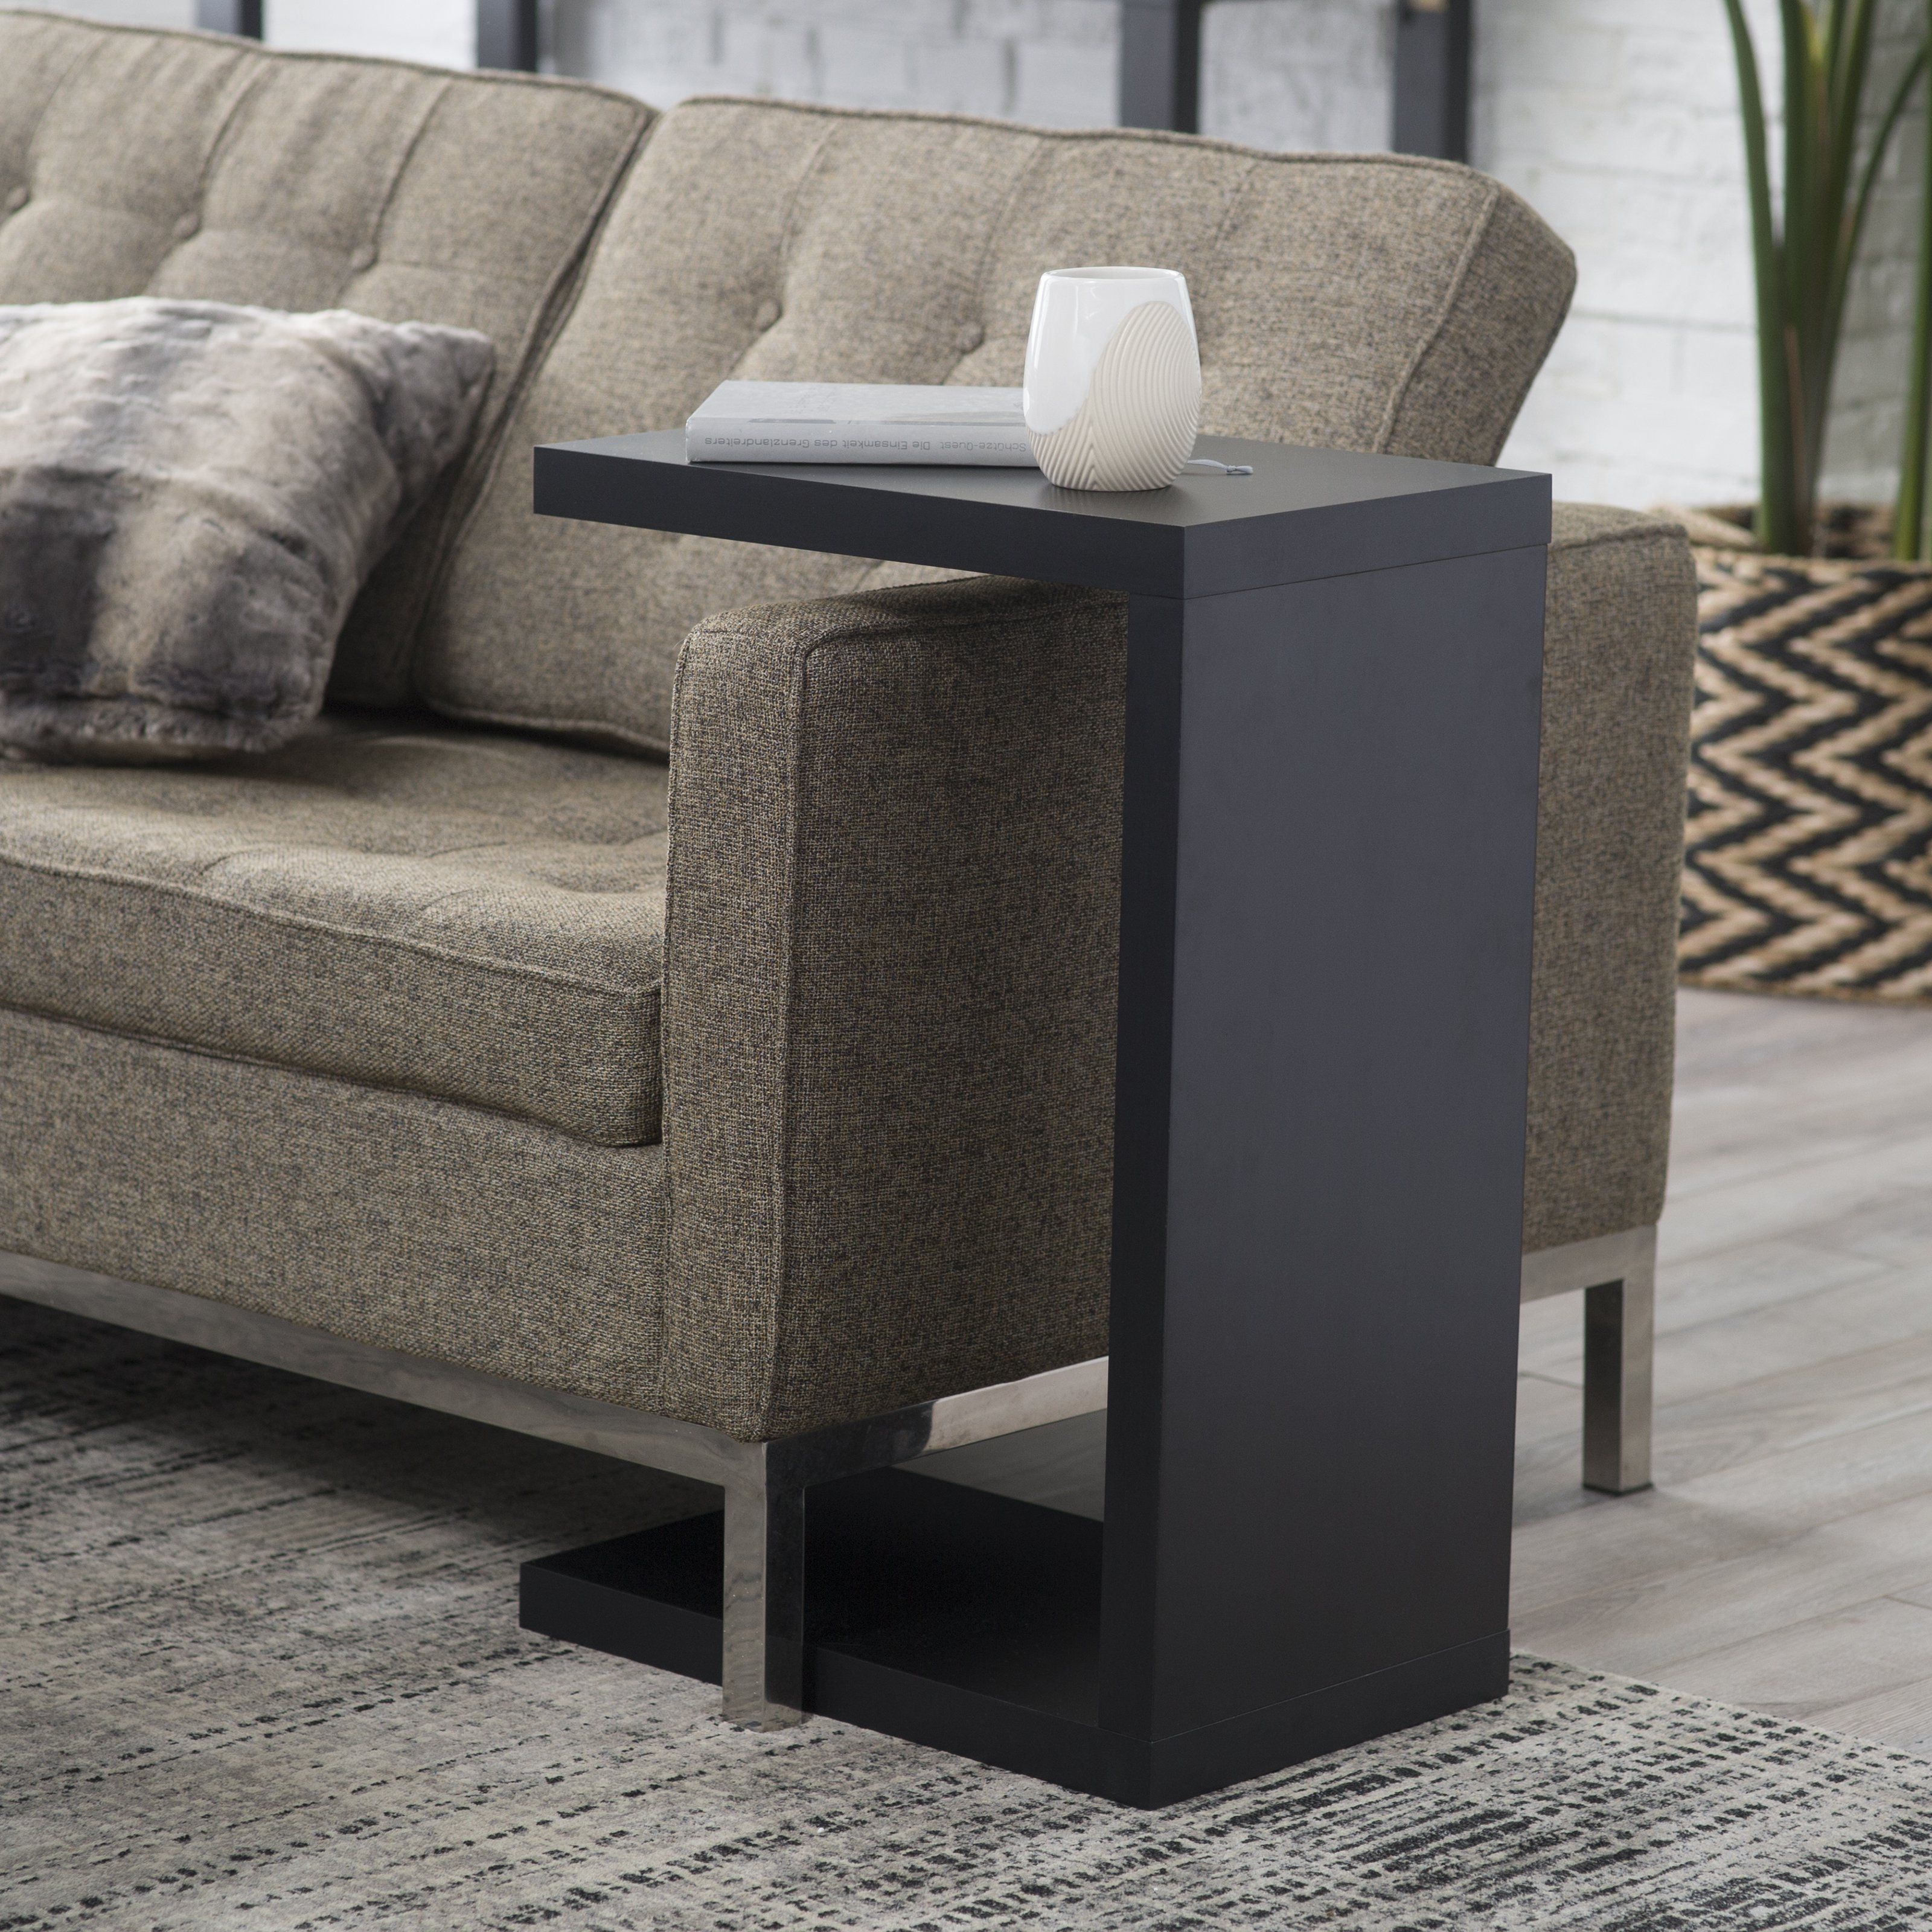 finley home hudson end table apt living room black tables sofa the modern shape this gives style and allows you pull close your chair has sleek magnolia market new location tile